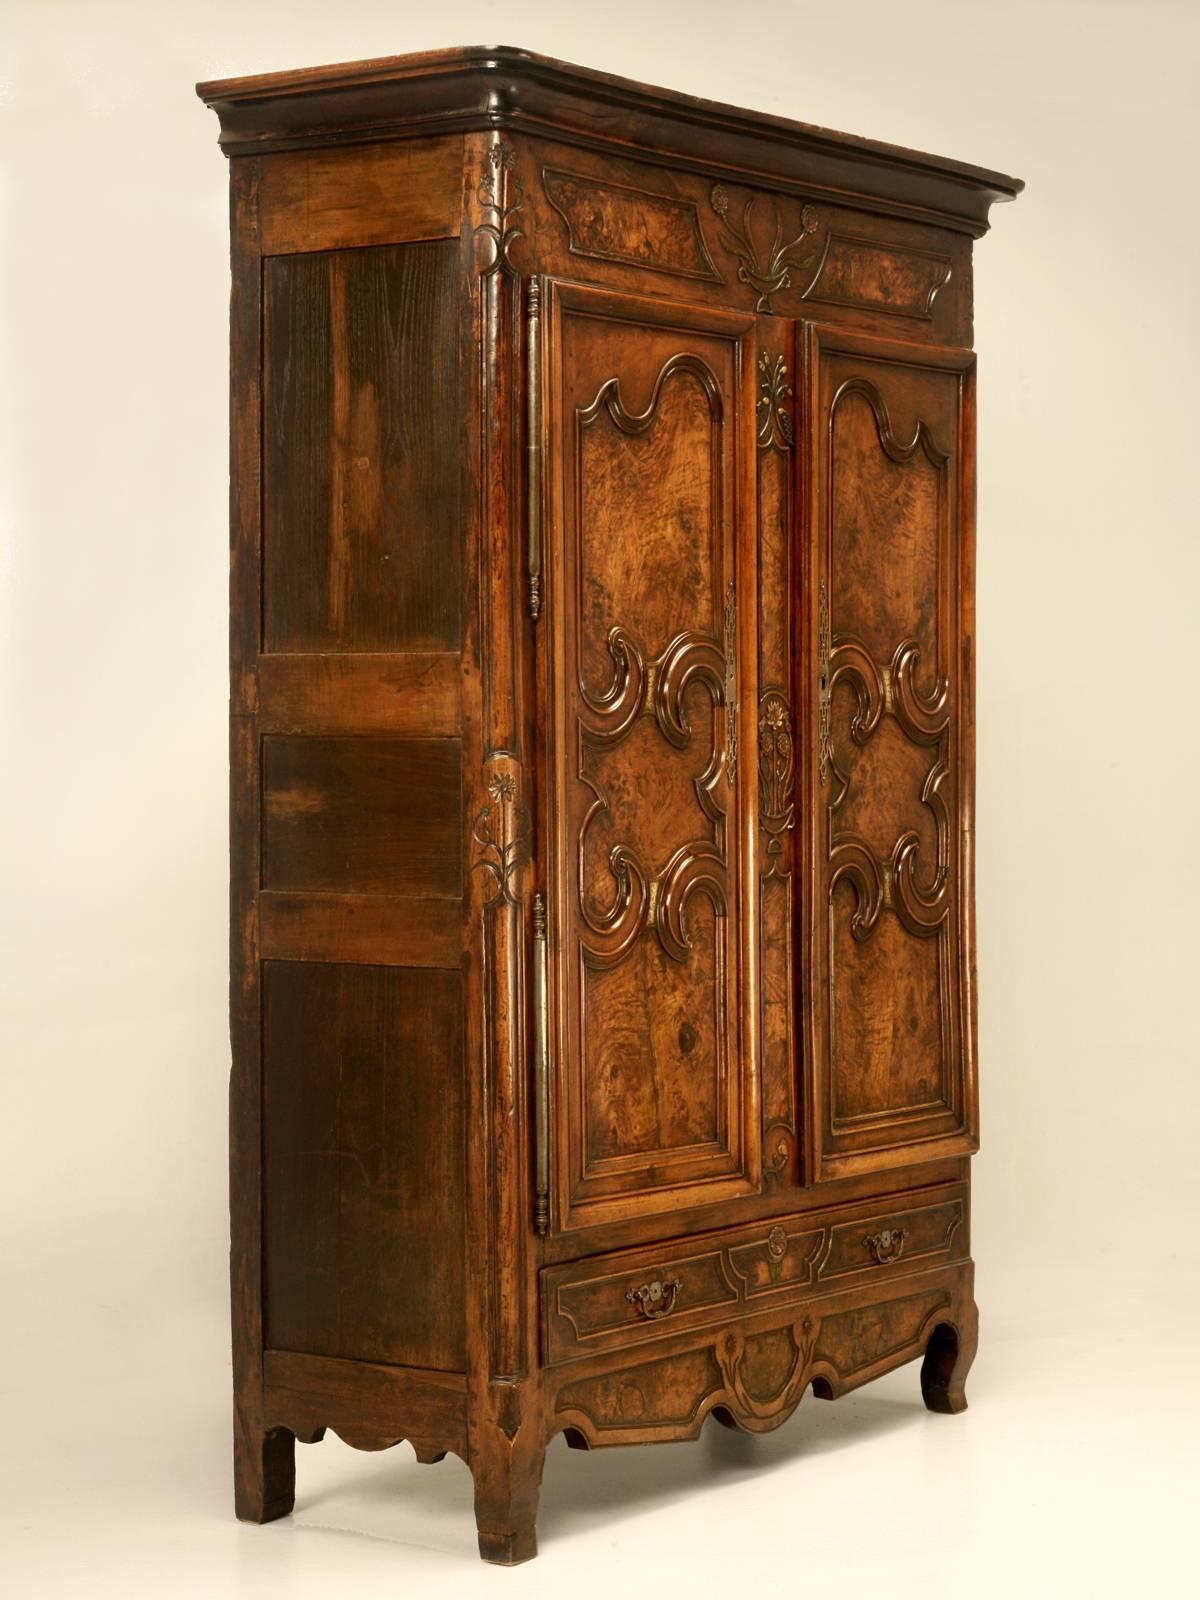 With the recent weakening of the French armoire market, it takes something really quite special to get our attention today and this one succeeded in spades. The incredible detailing and the grain of the burl wood is as nice as it gets. Note the